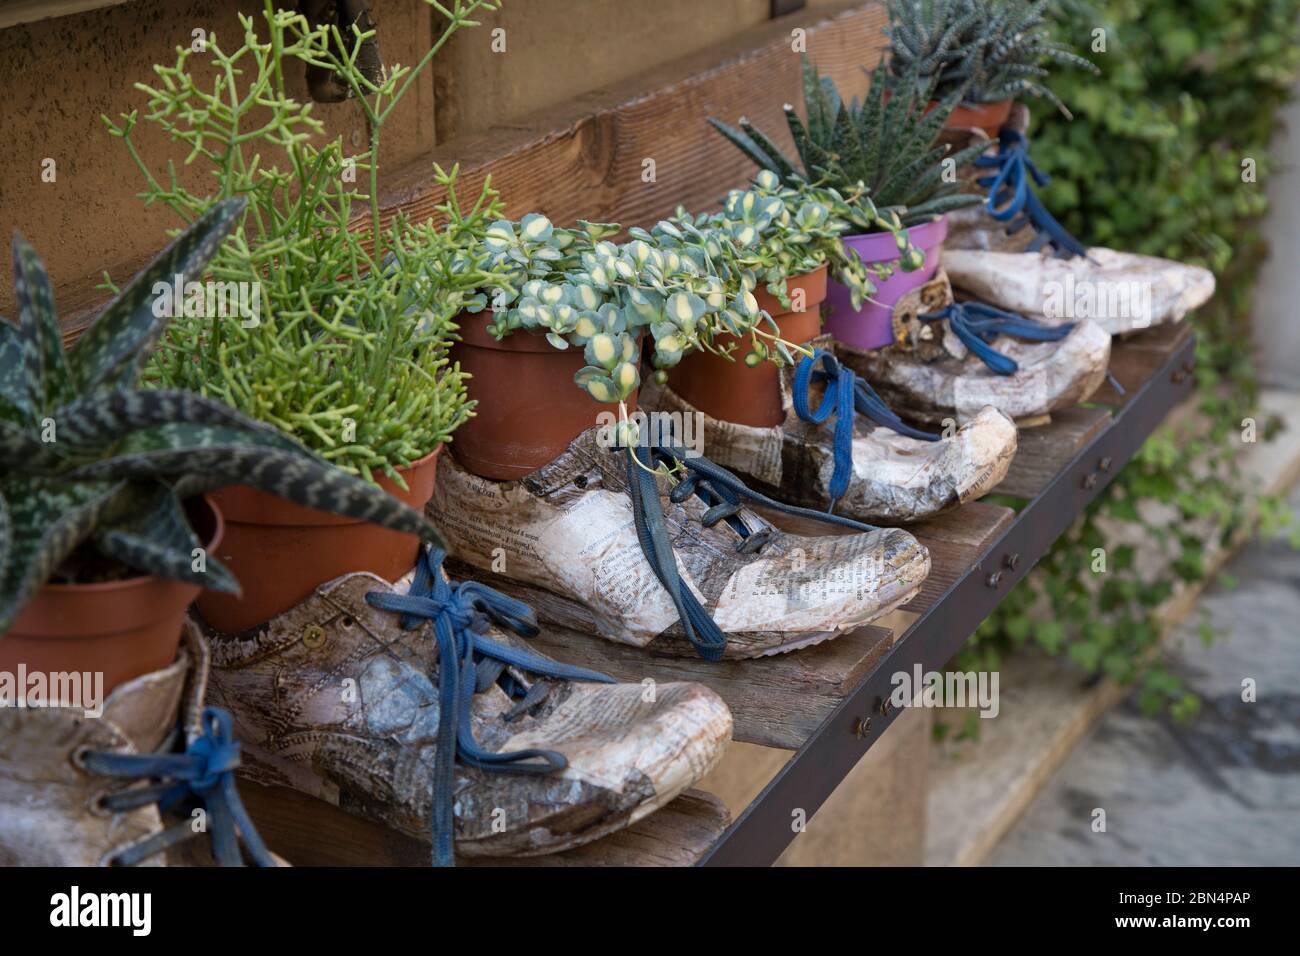 Unique shoe display at shoe store in Montepulciano, Tuscany, Italy Stock Photo